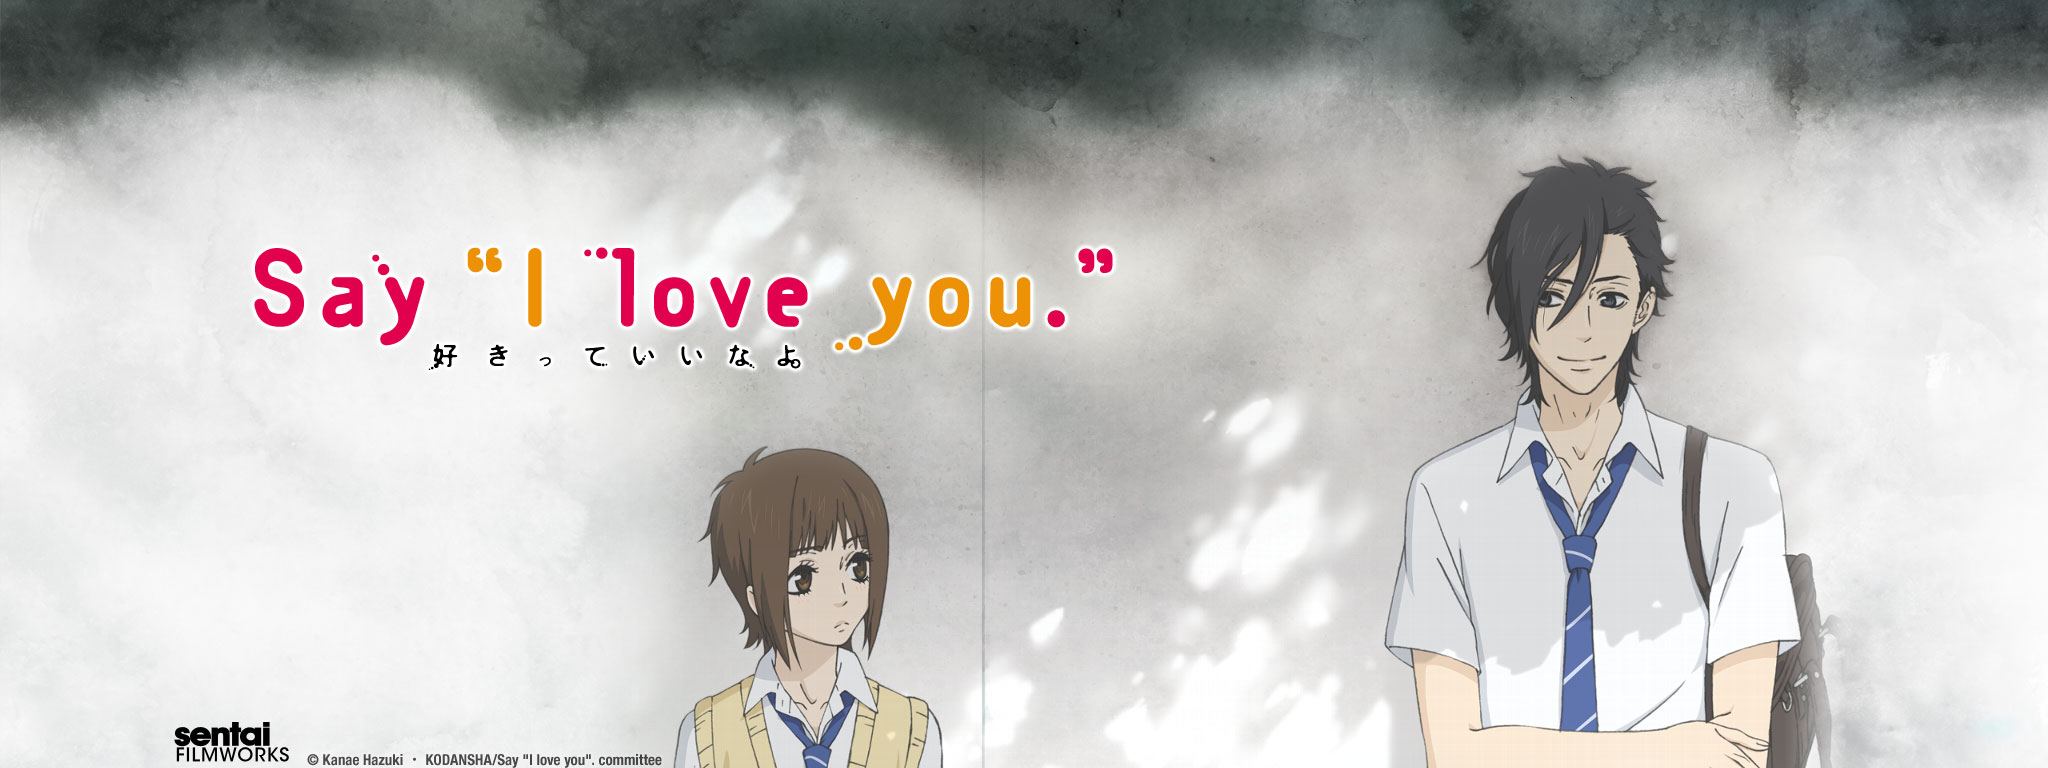 Title Art for Say "I Love You"